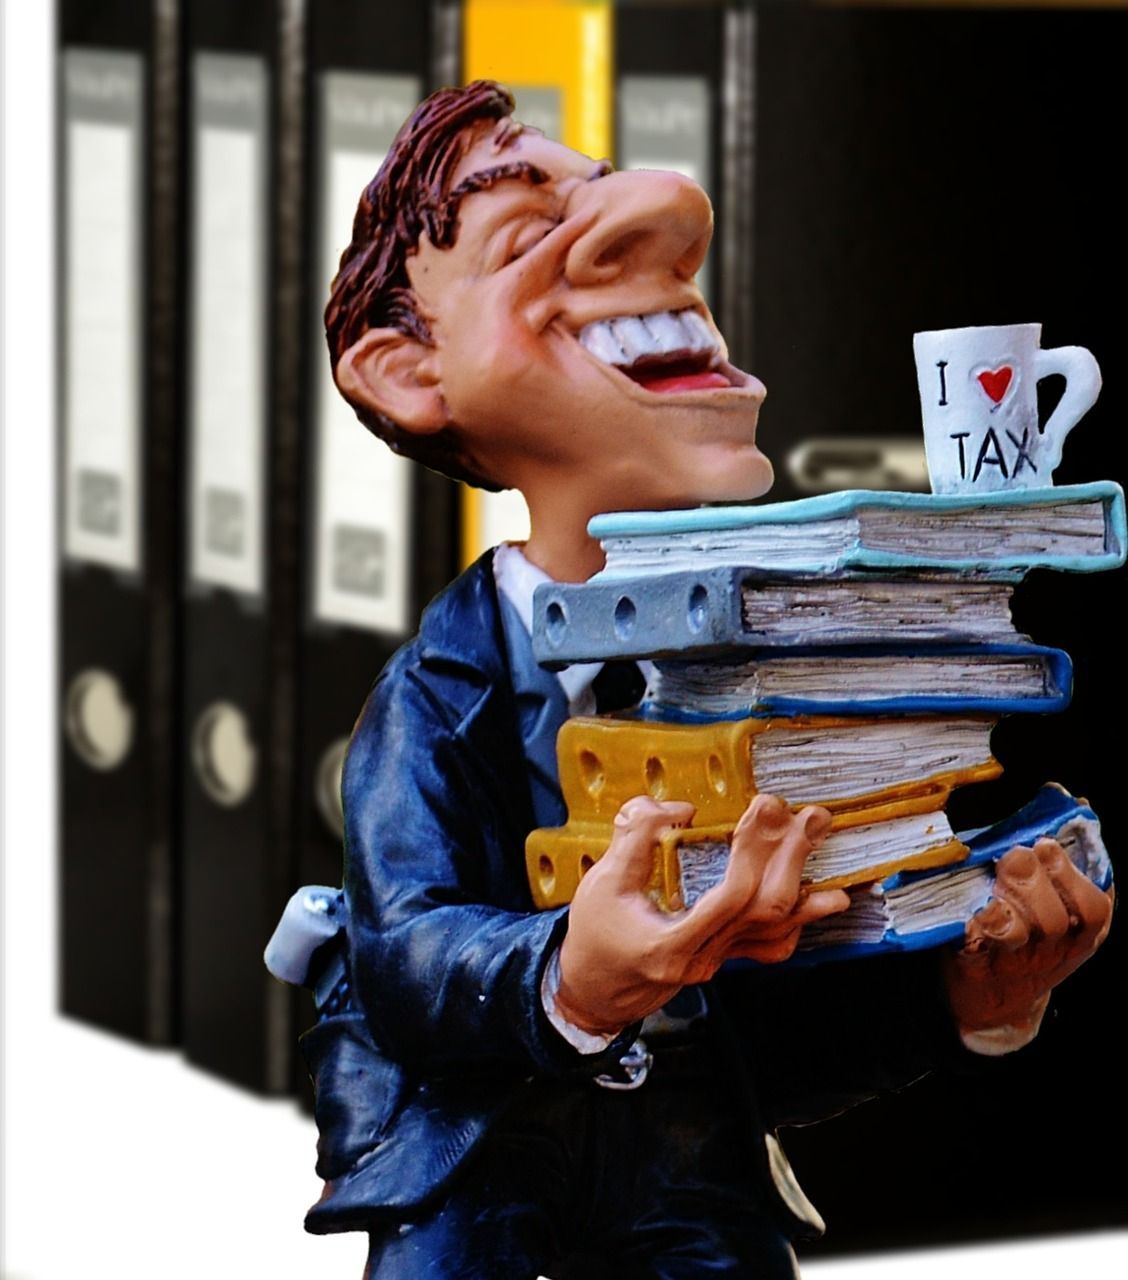 clay image holding stack of binders with cup on top says i love tax